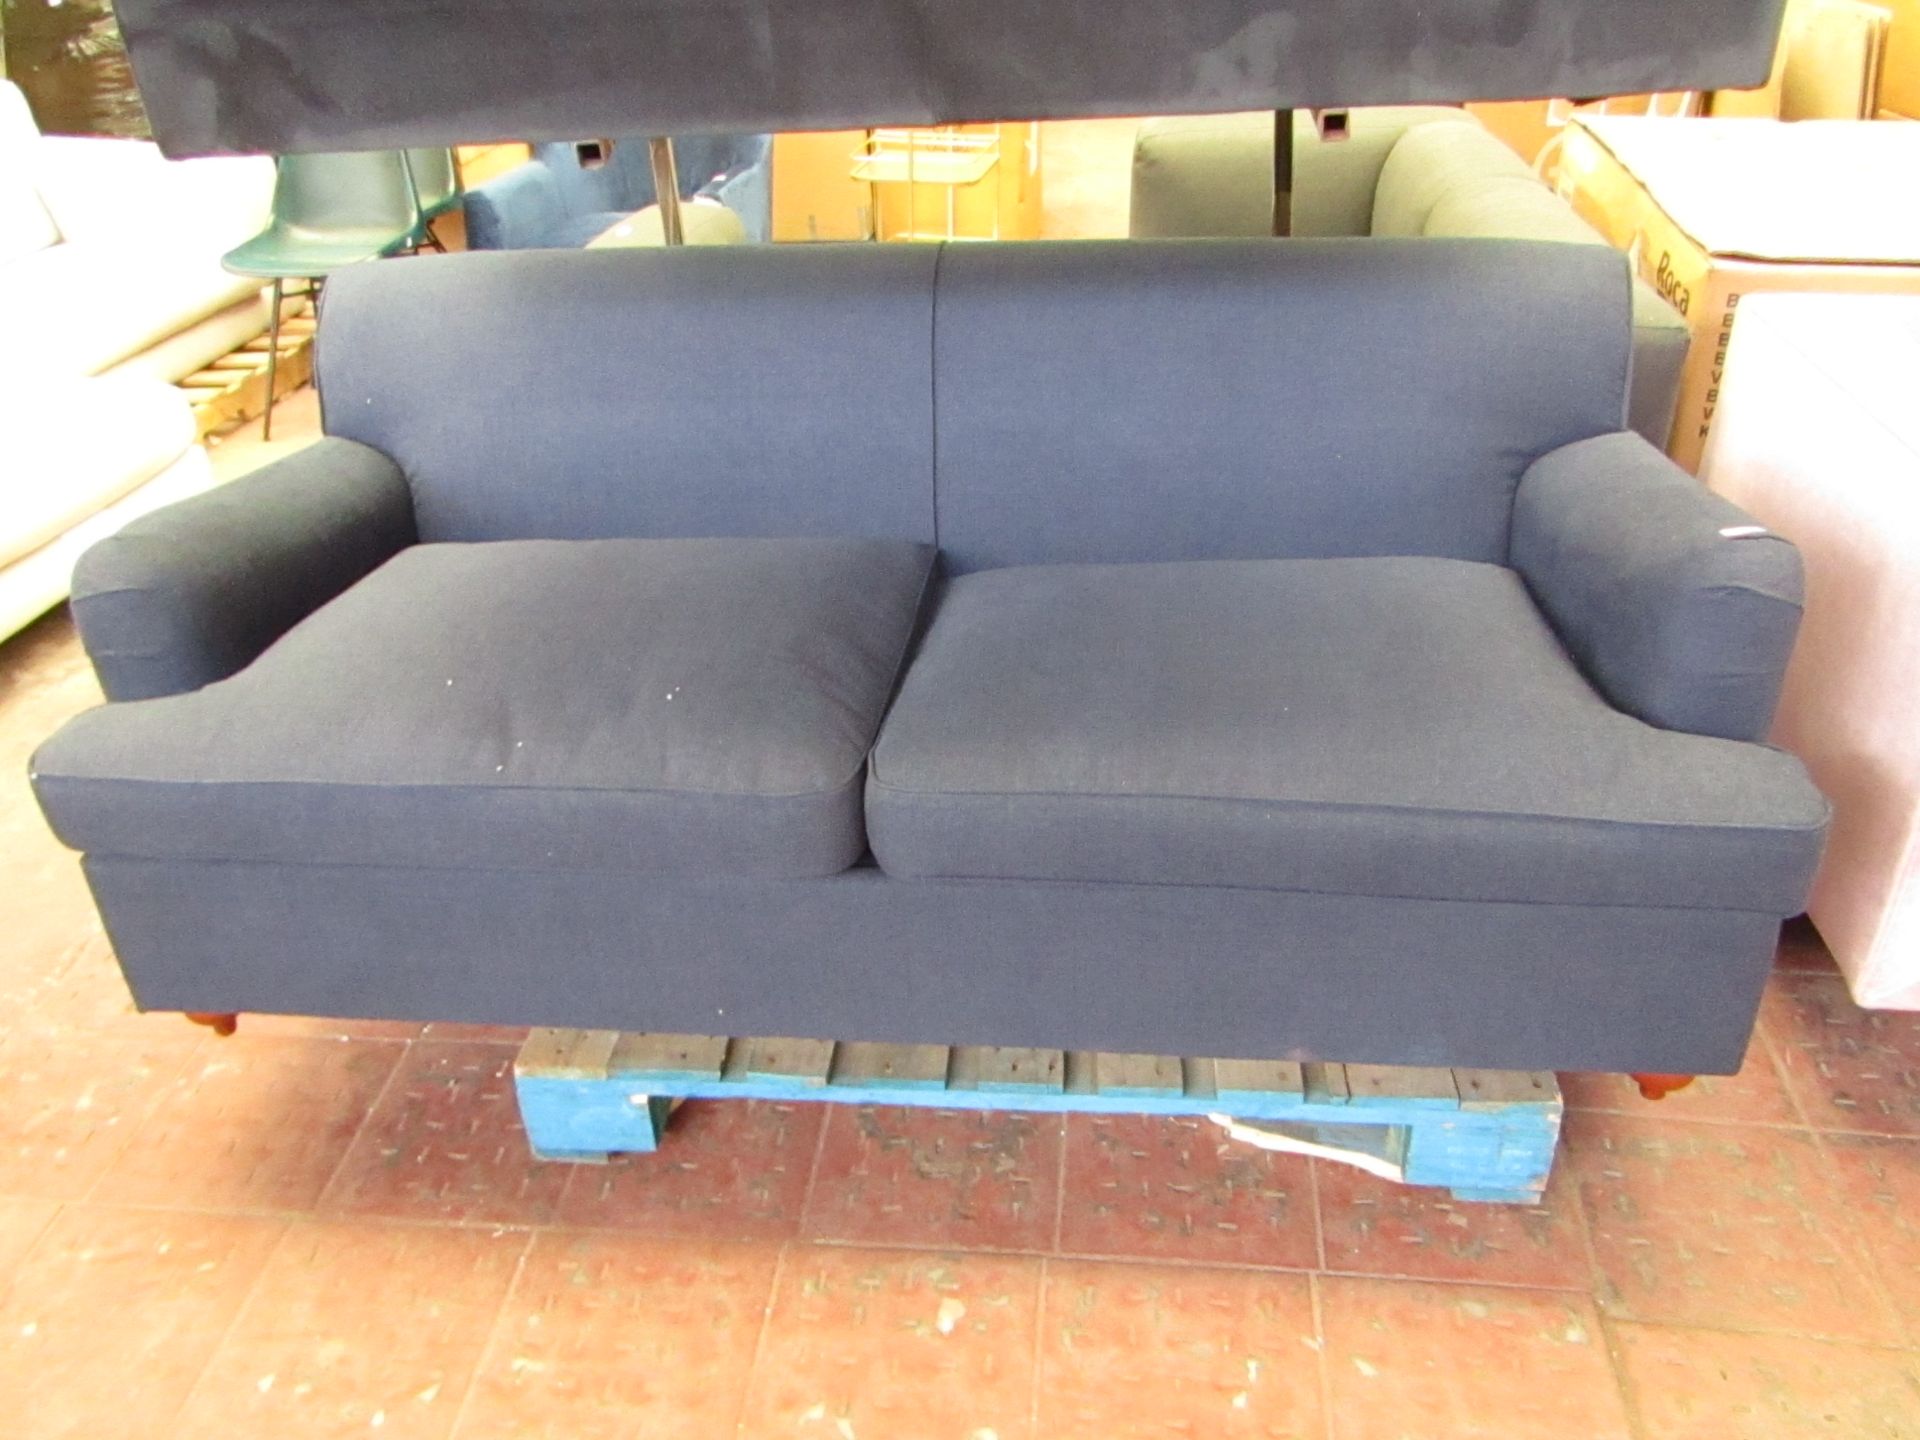 | 1X | MADE.COM ORSON 3 SEATER BLUE FABRIC SOFA BED | COULD DO WITH A CLEAN IN PLACES, THE BED